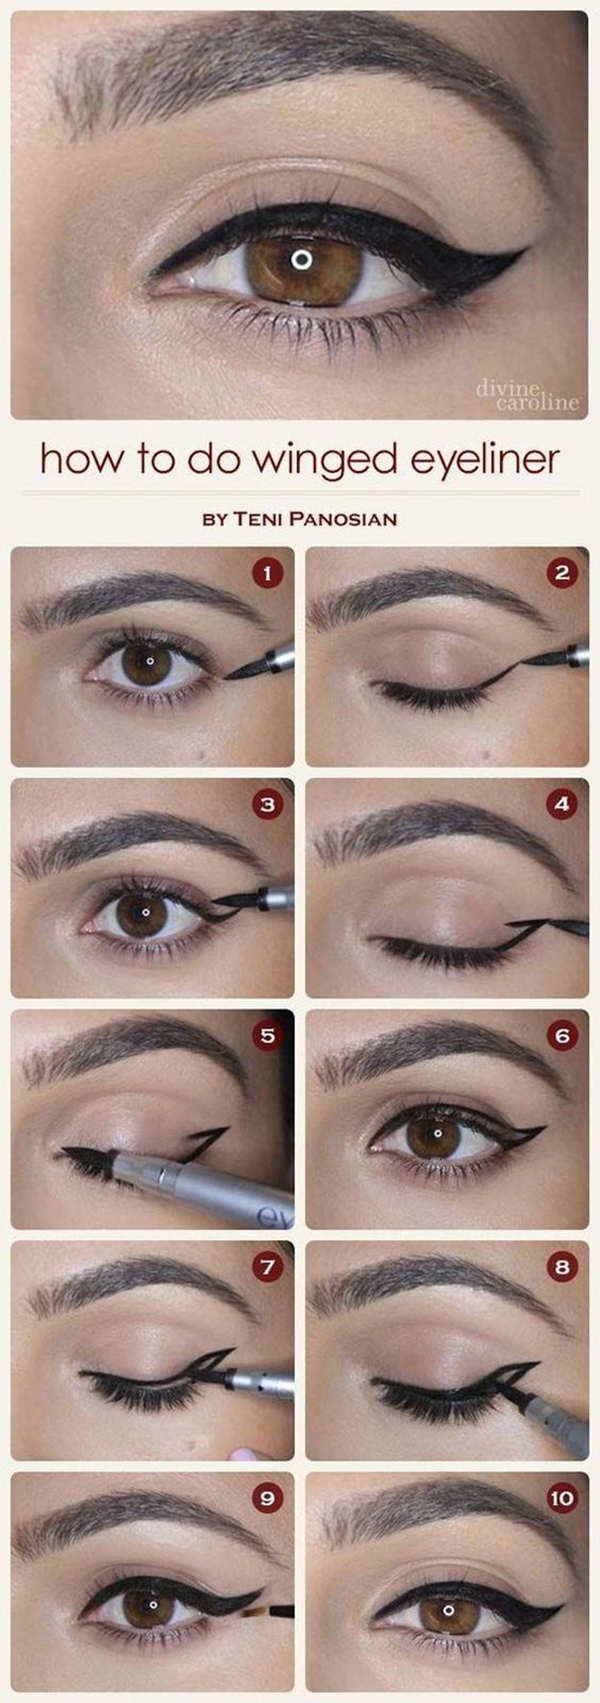 Six-Minutes-Makeup-Guides-For-Working-Wome